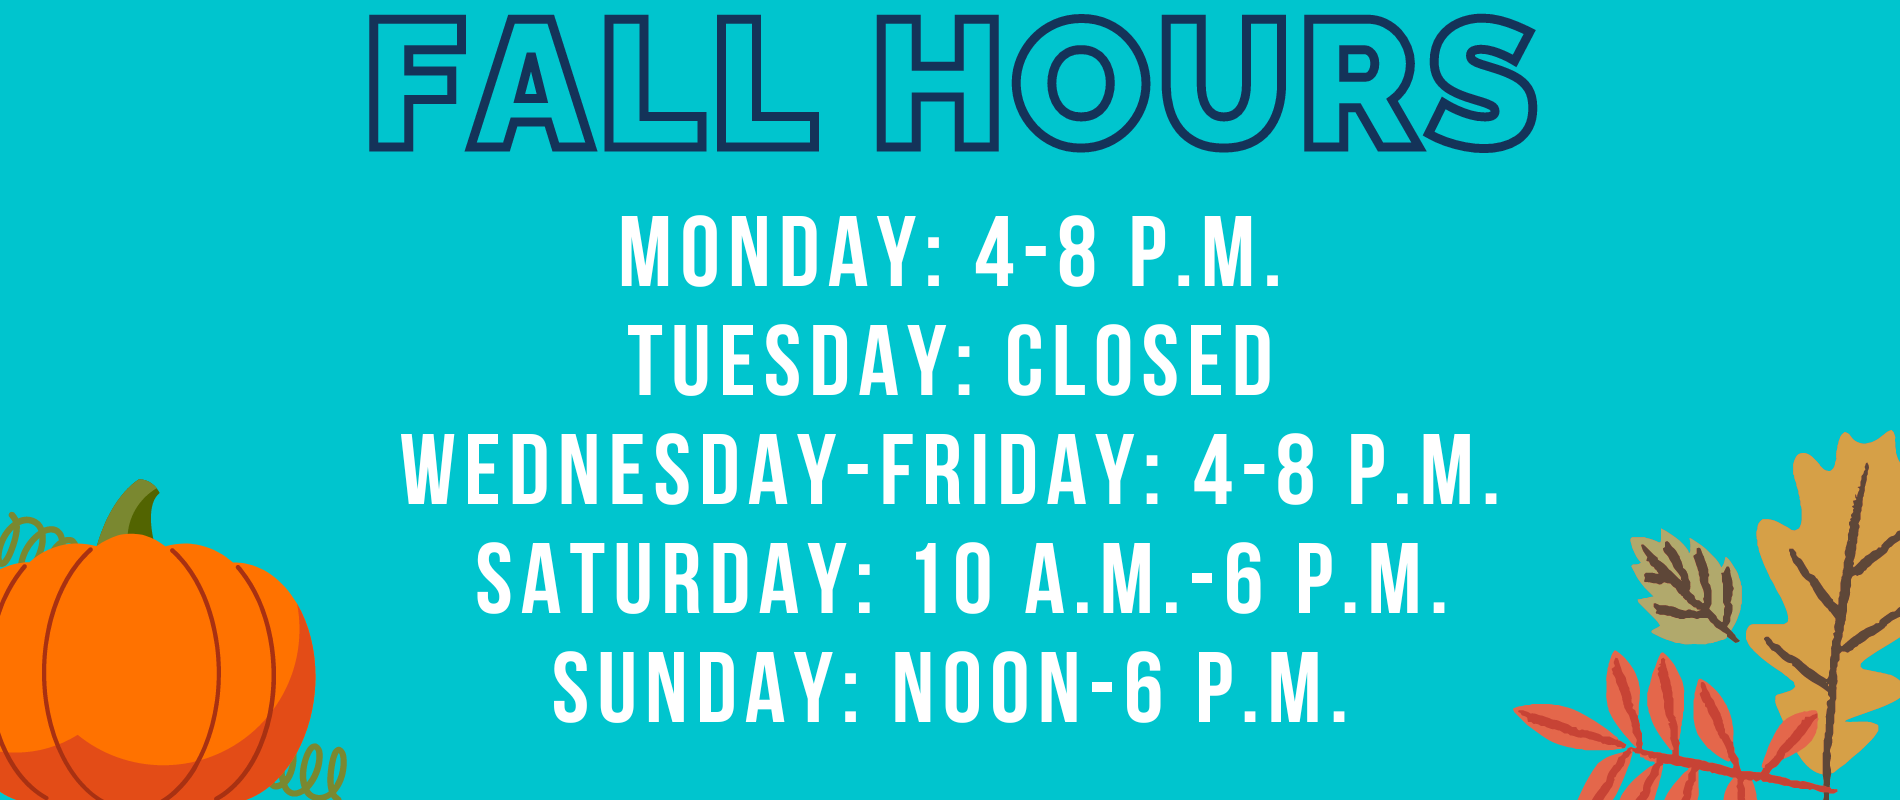 Fall hours at the cove